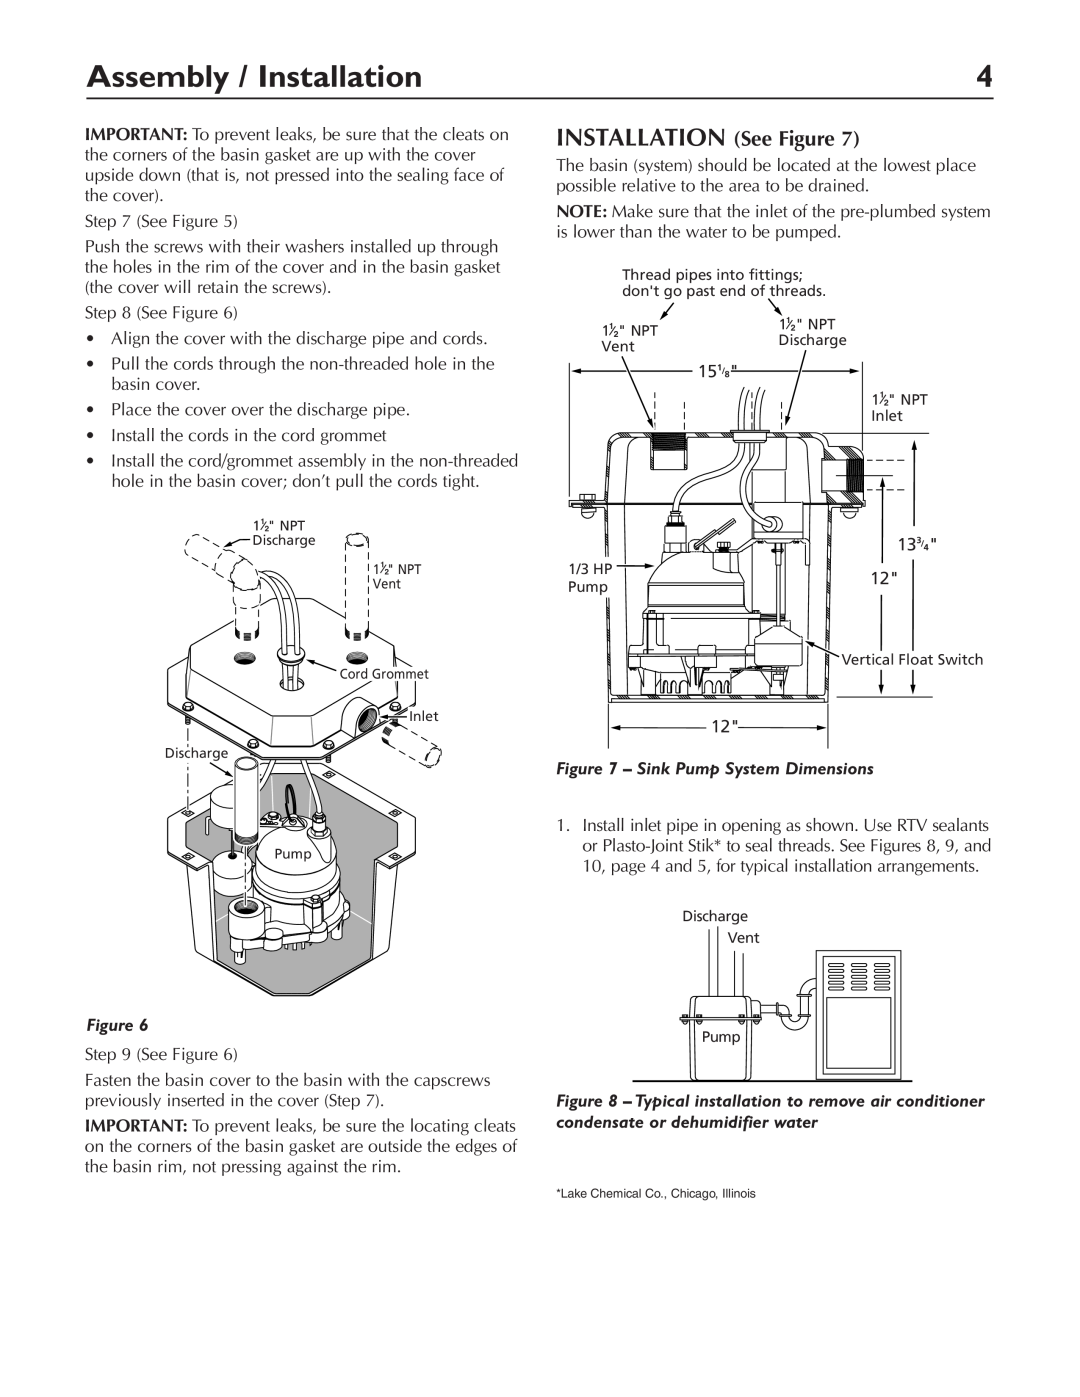 Pentair DP233110V owner manual Assembly / Installation, INSTALLATION See Figure, Sink Pump System Dimensions 